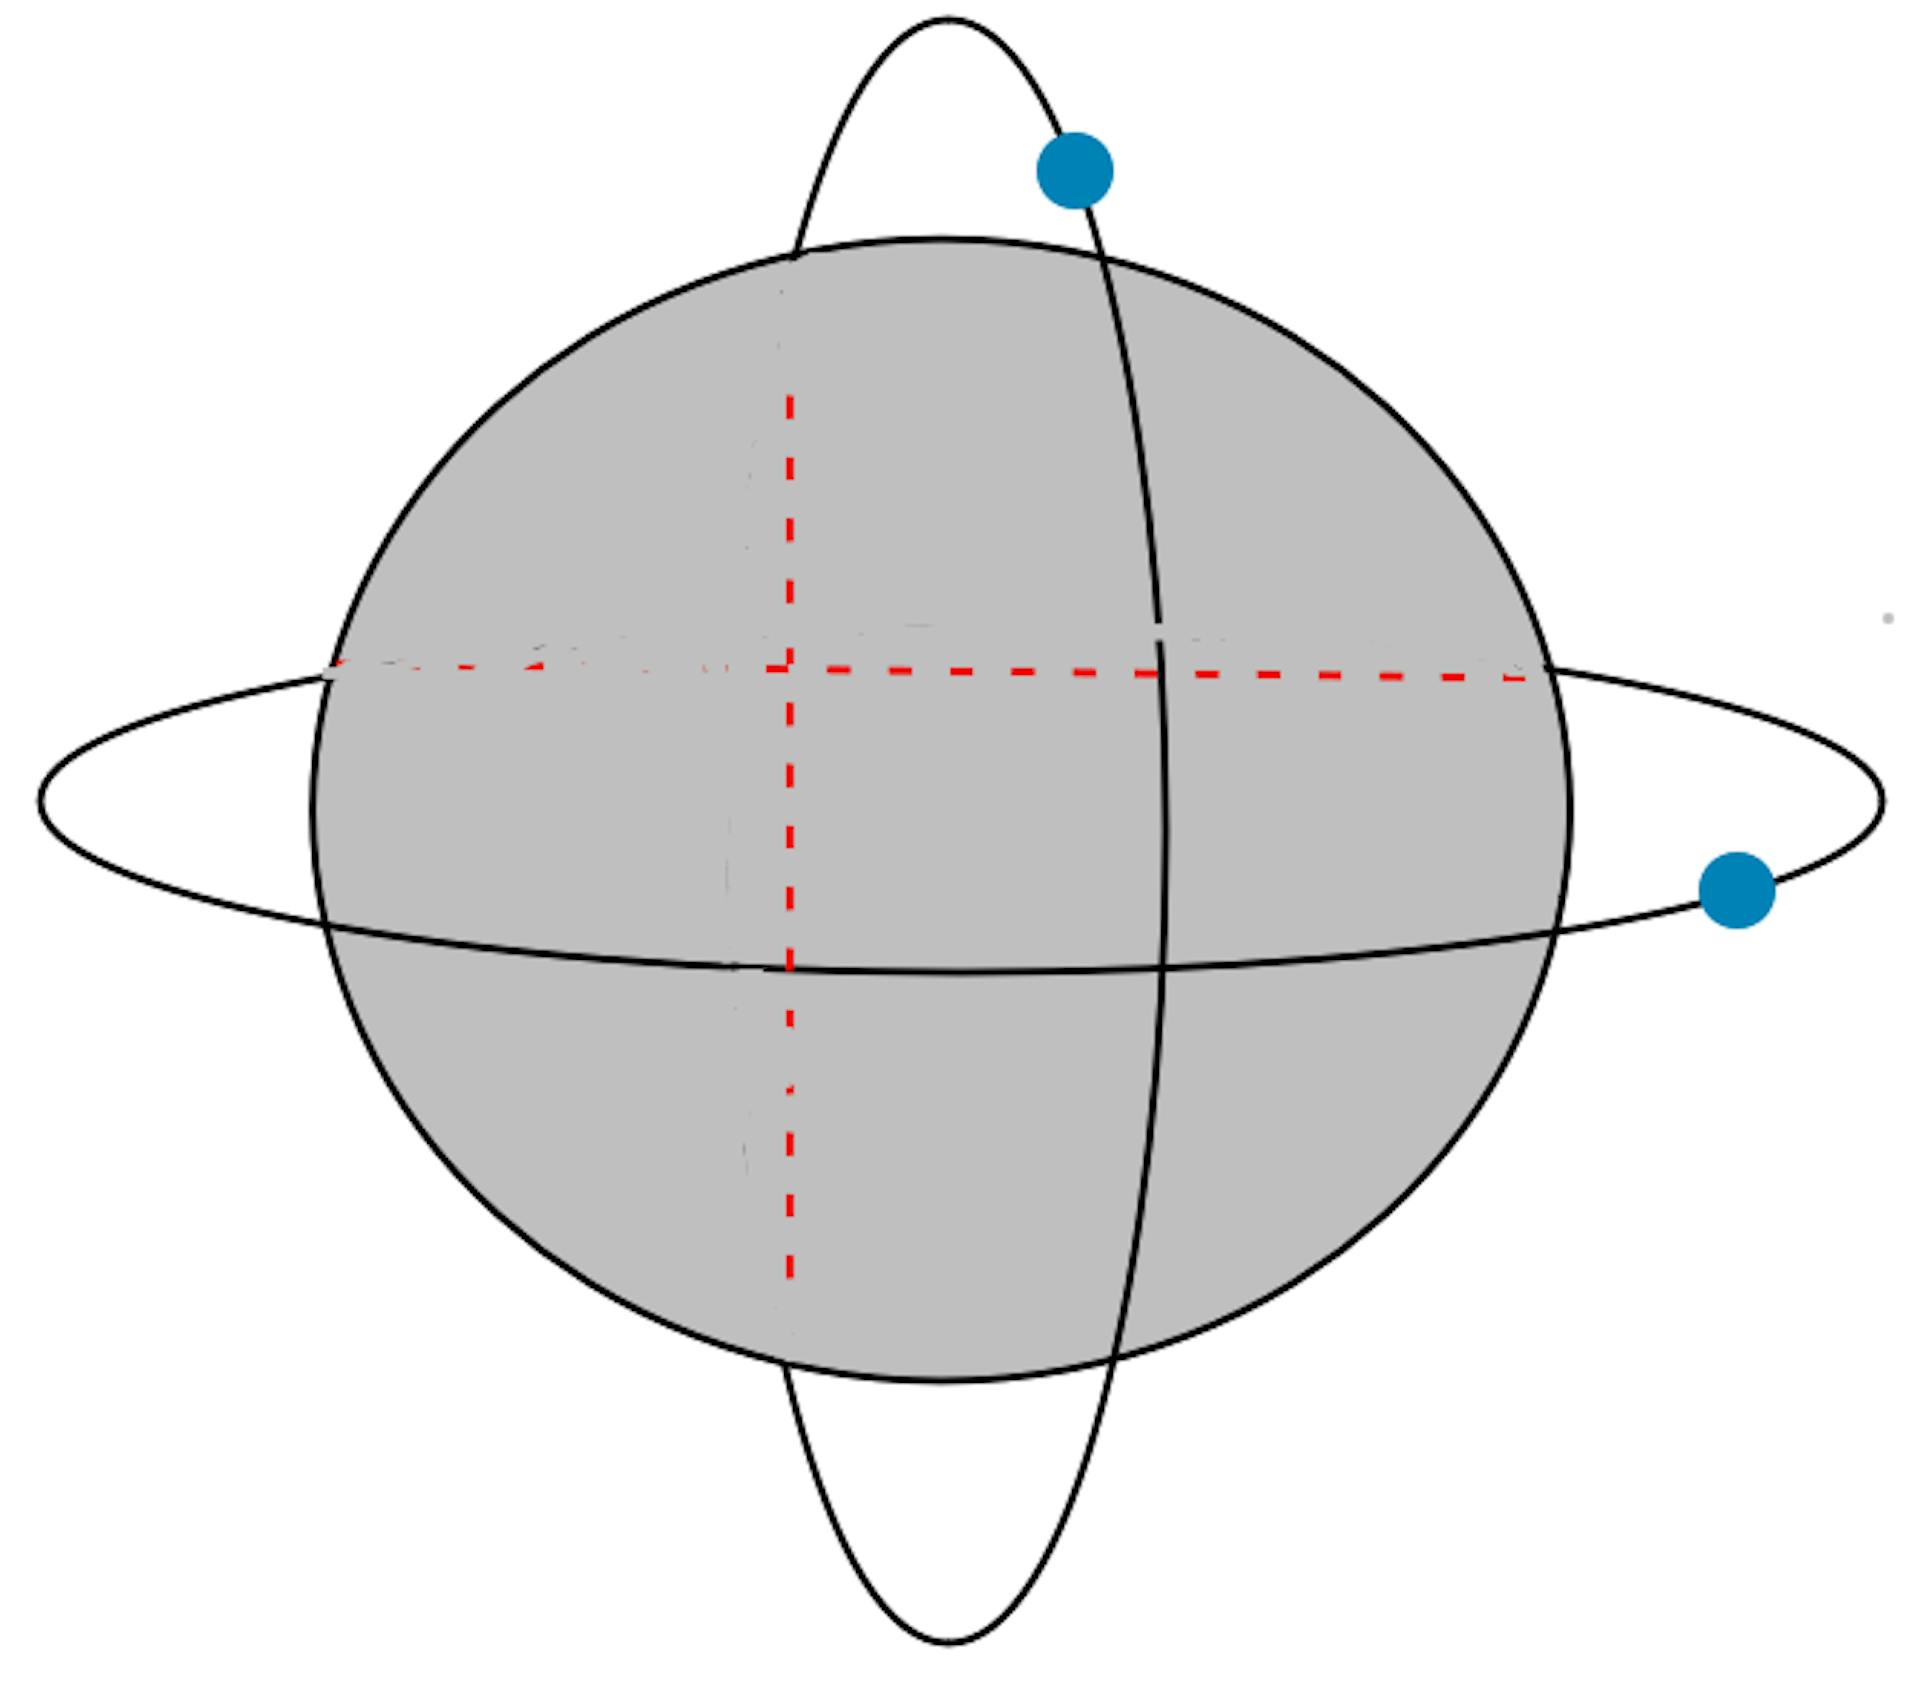 Image 1: Atom With 2 Electrons (and thus, 2 protons at its core)